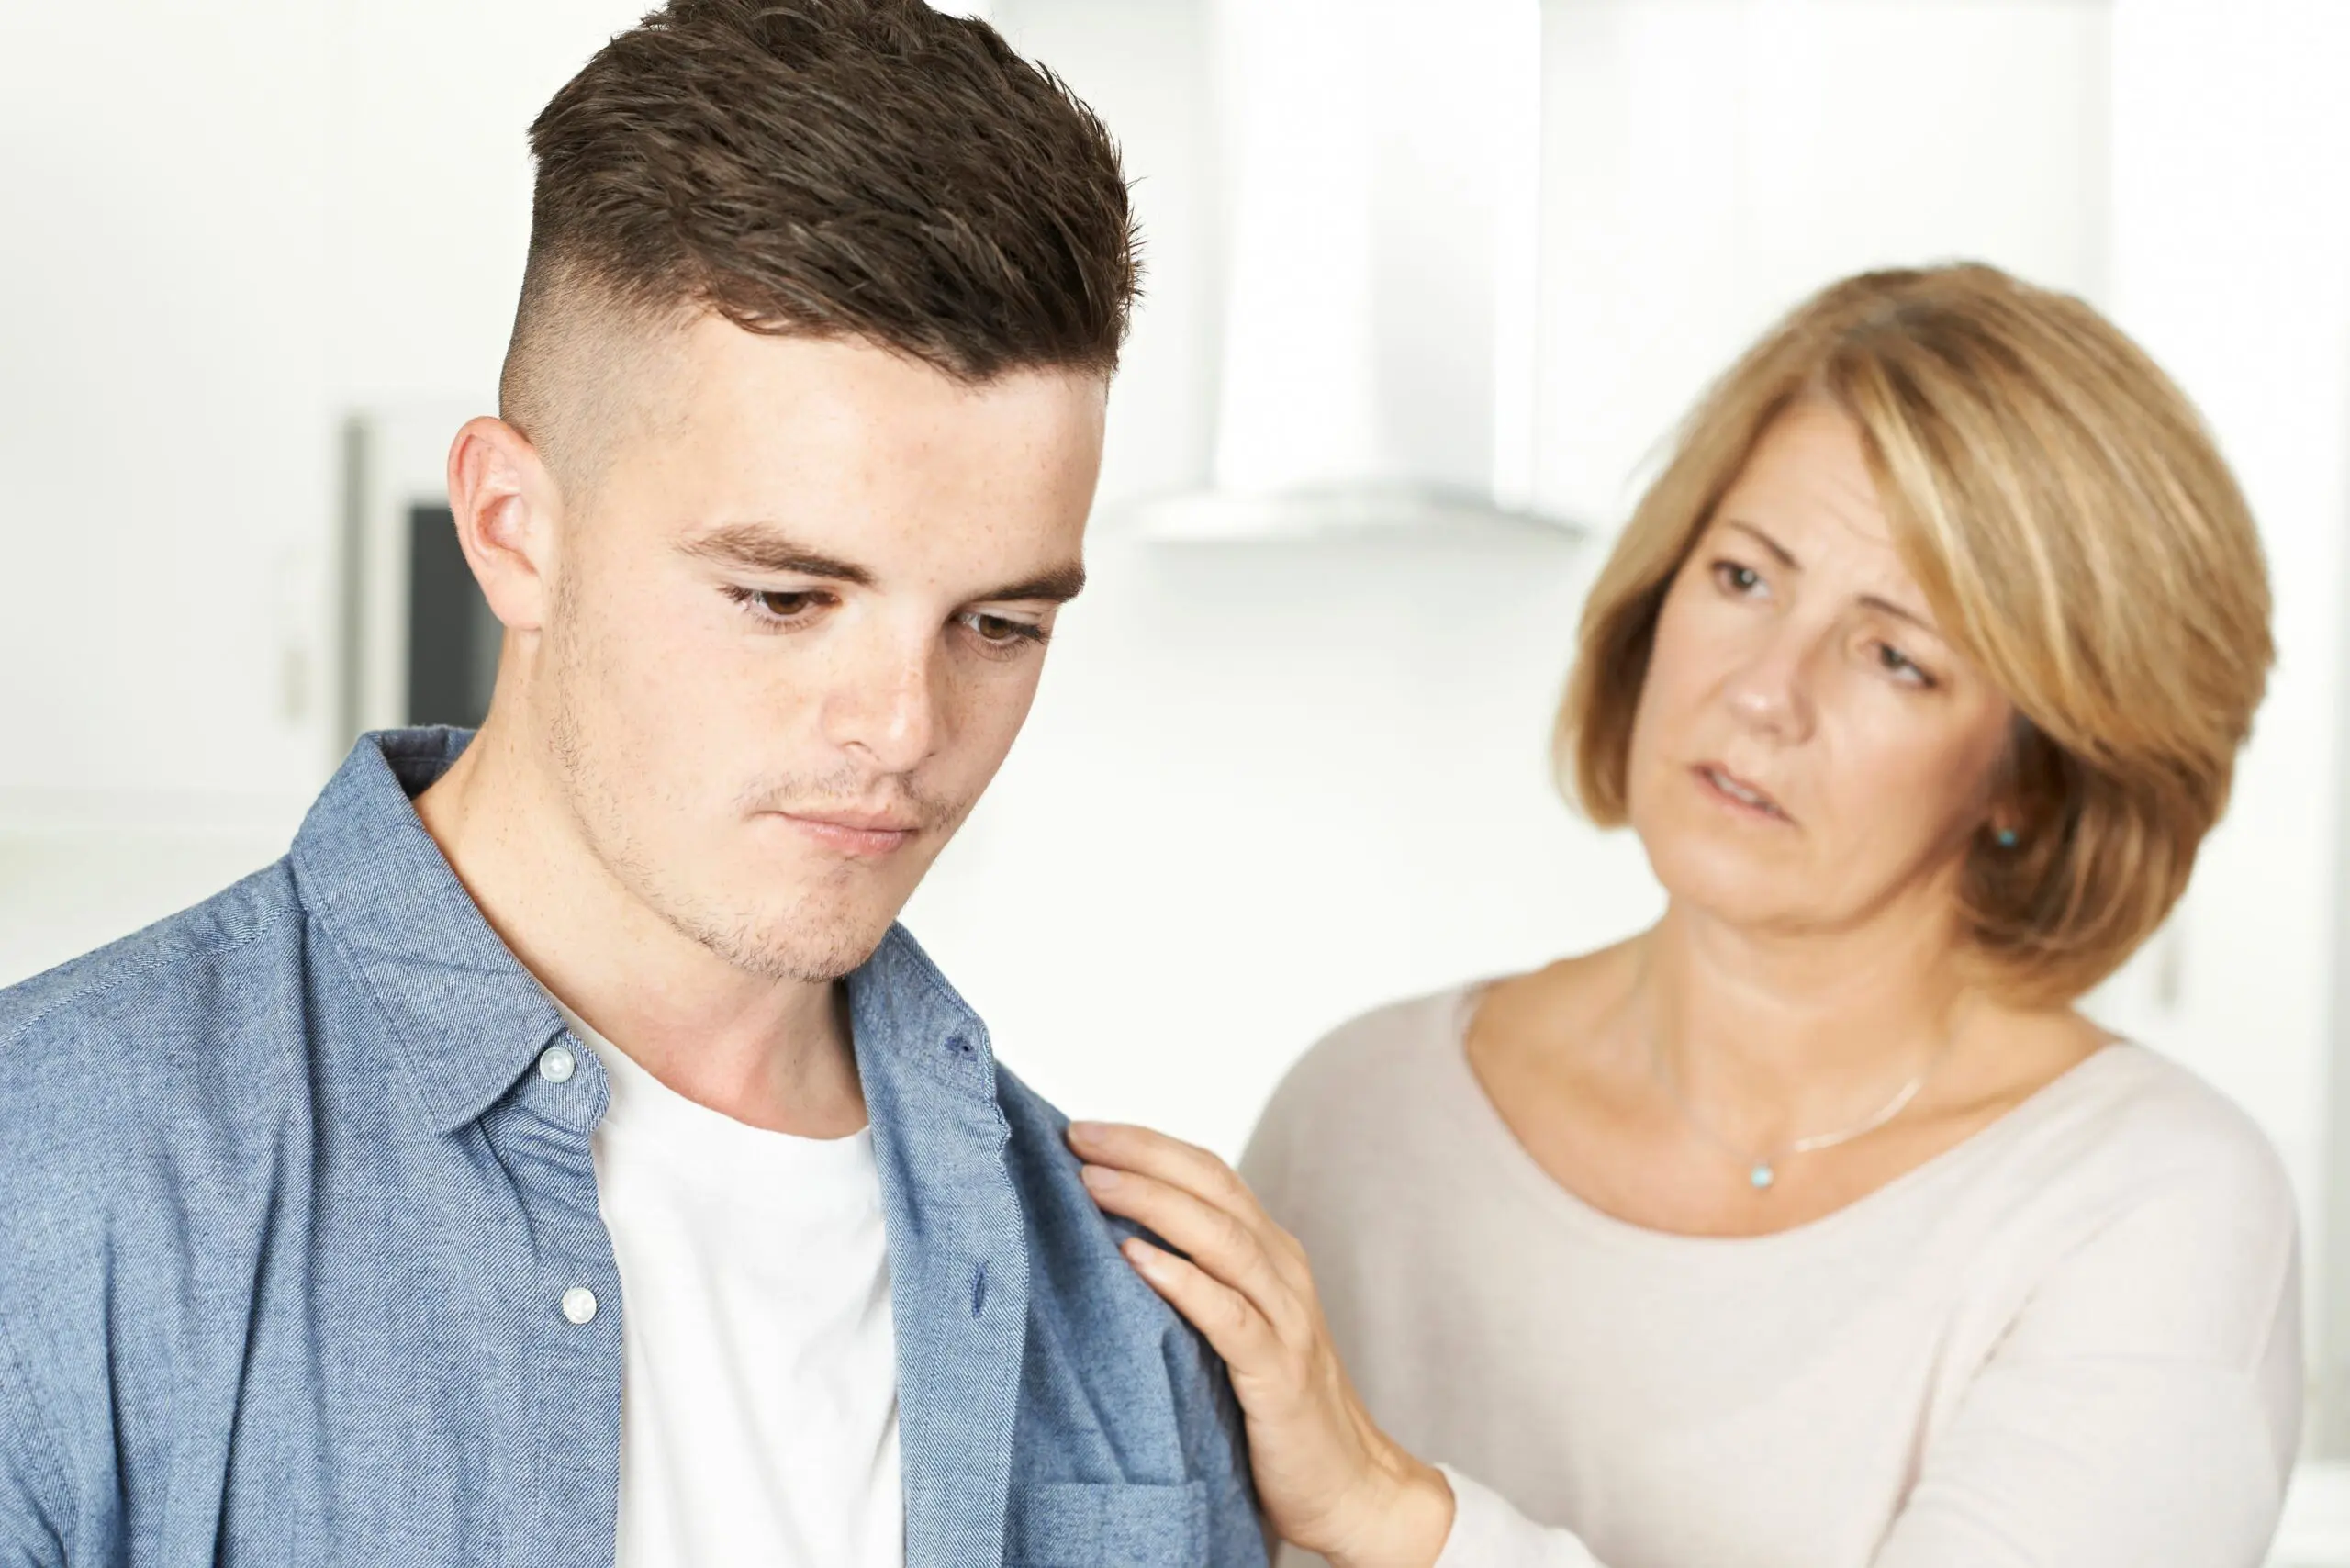 My 18 year old son has a drinking problem – what should i do scaled